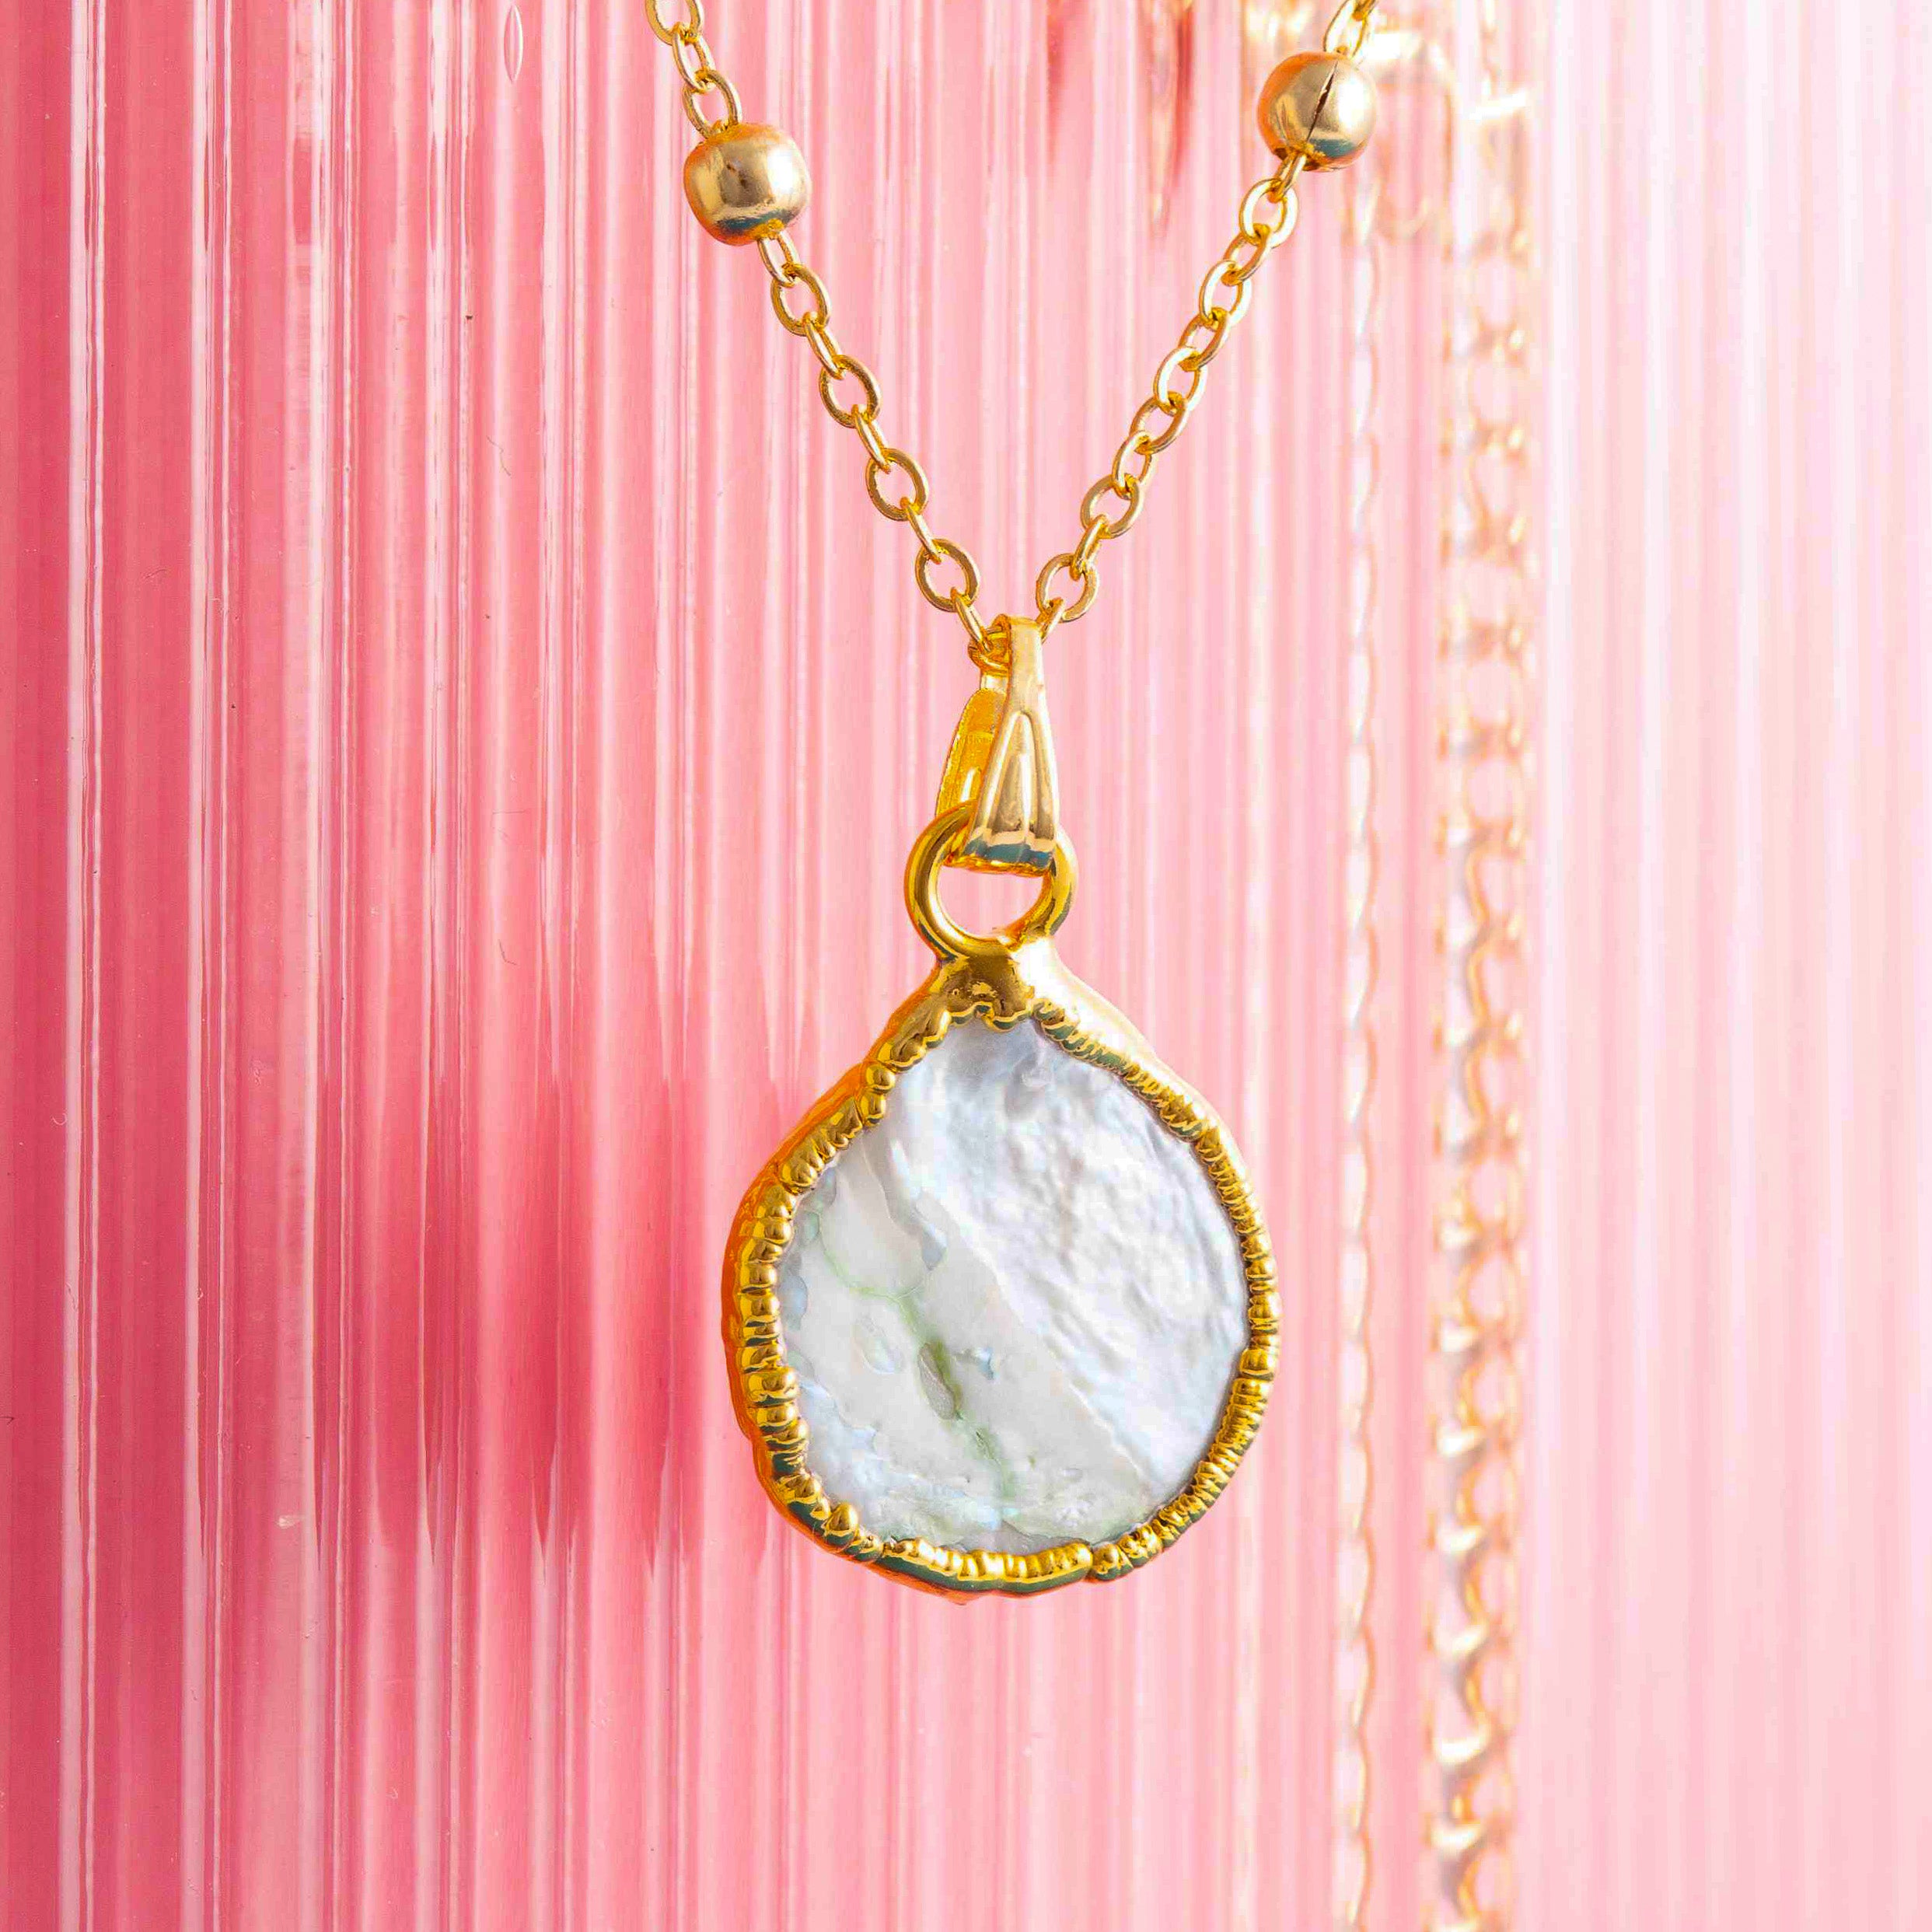 MOTHER OF PEARL CHARM PENDANT